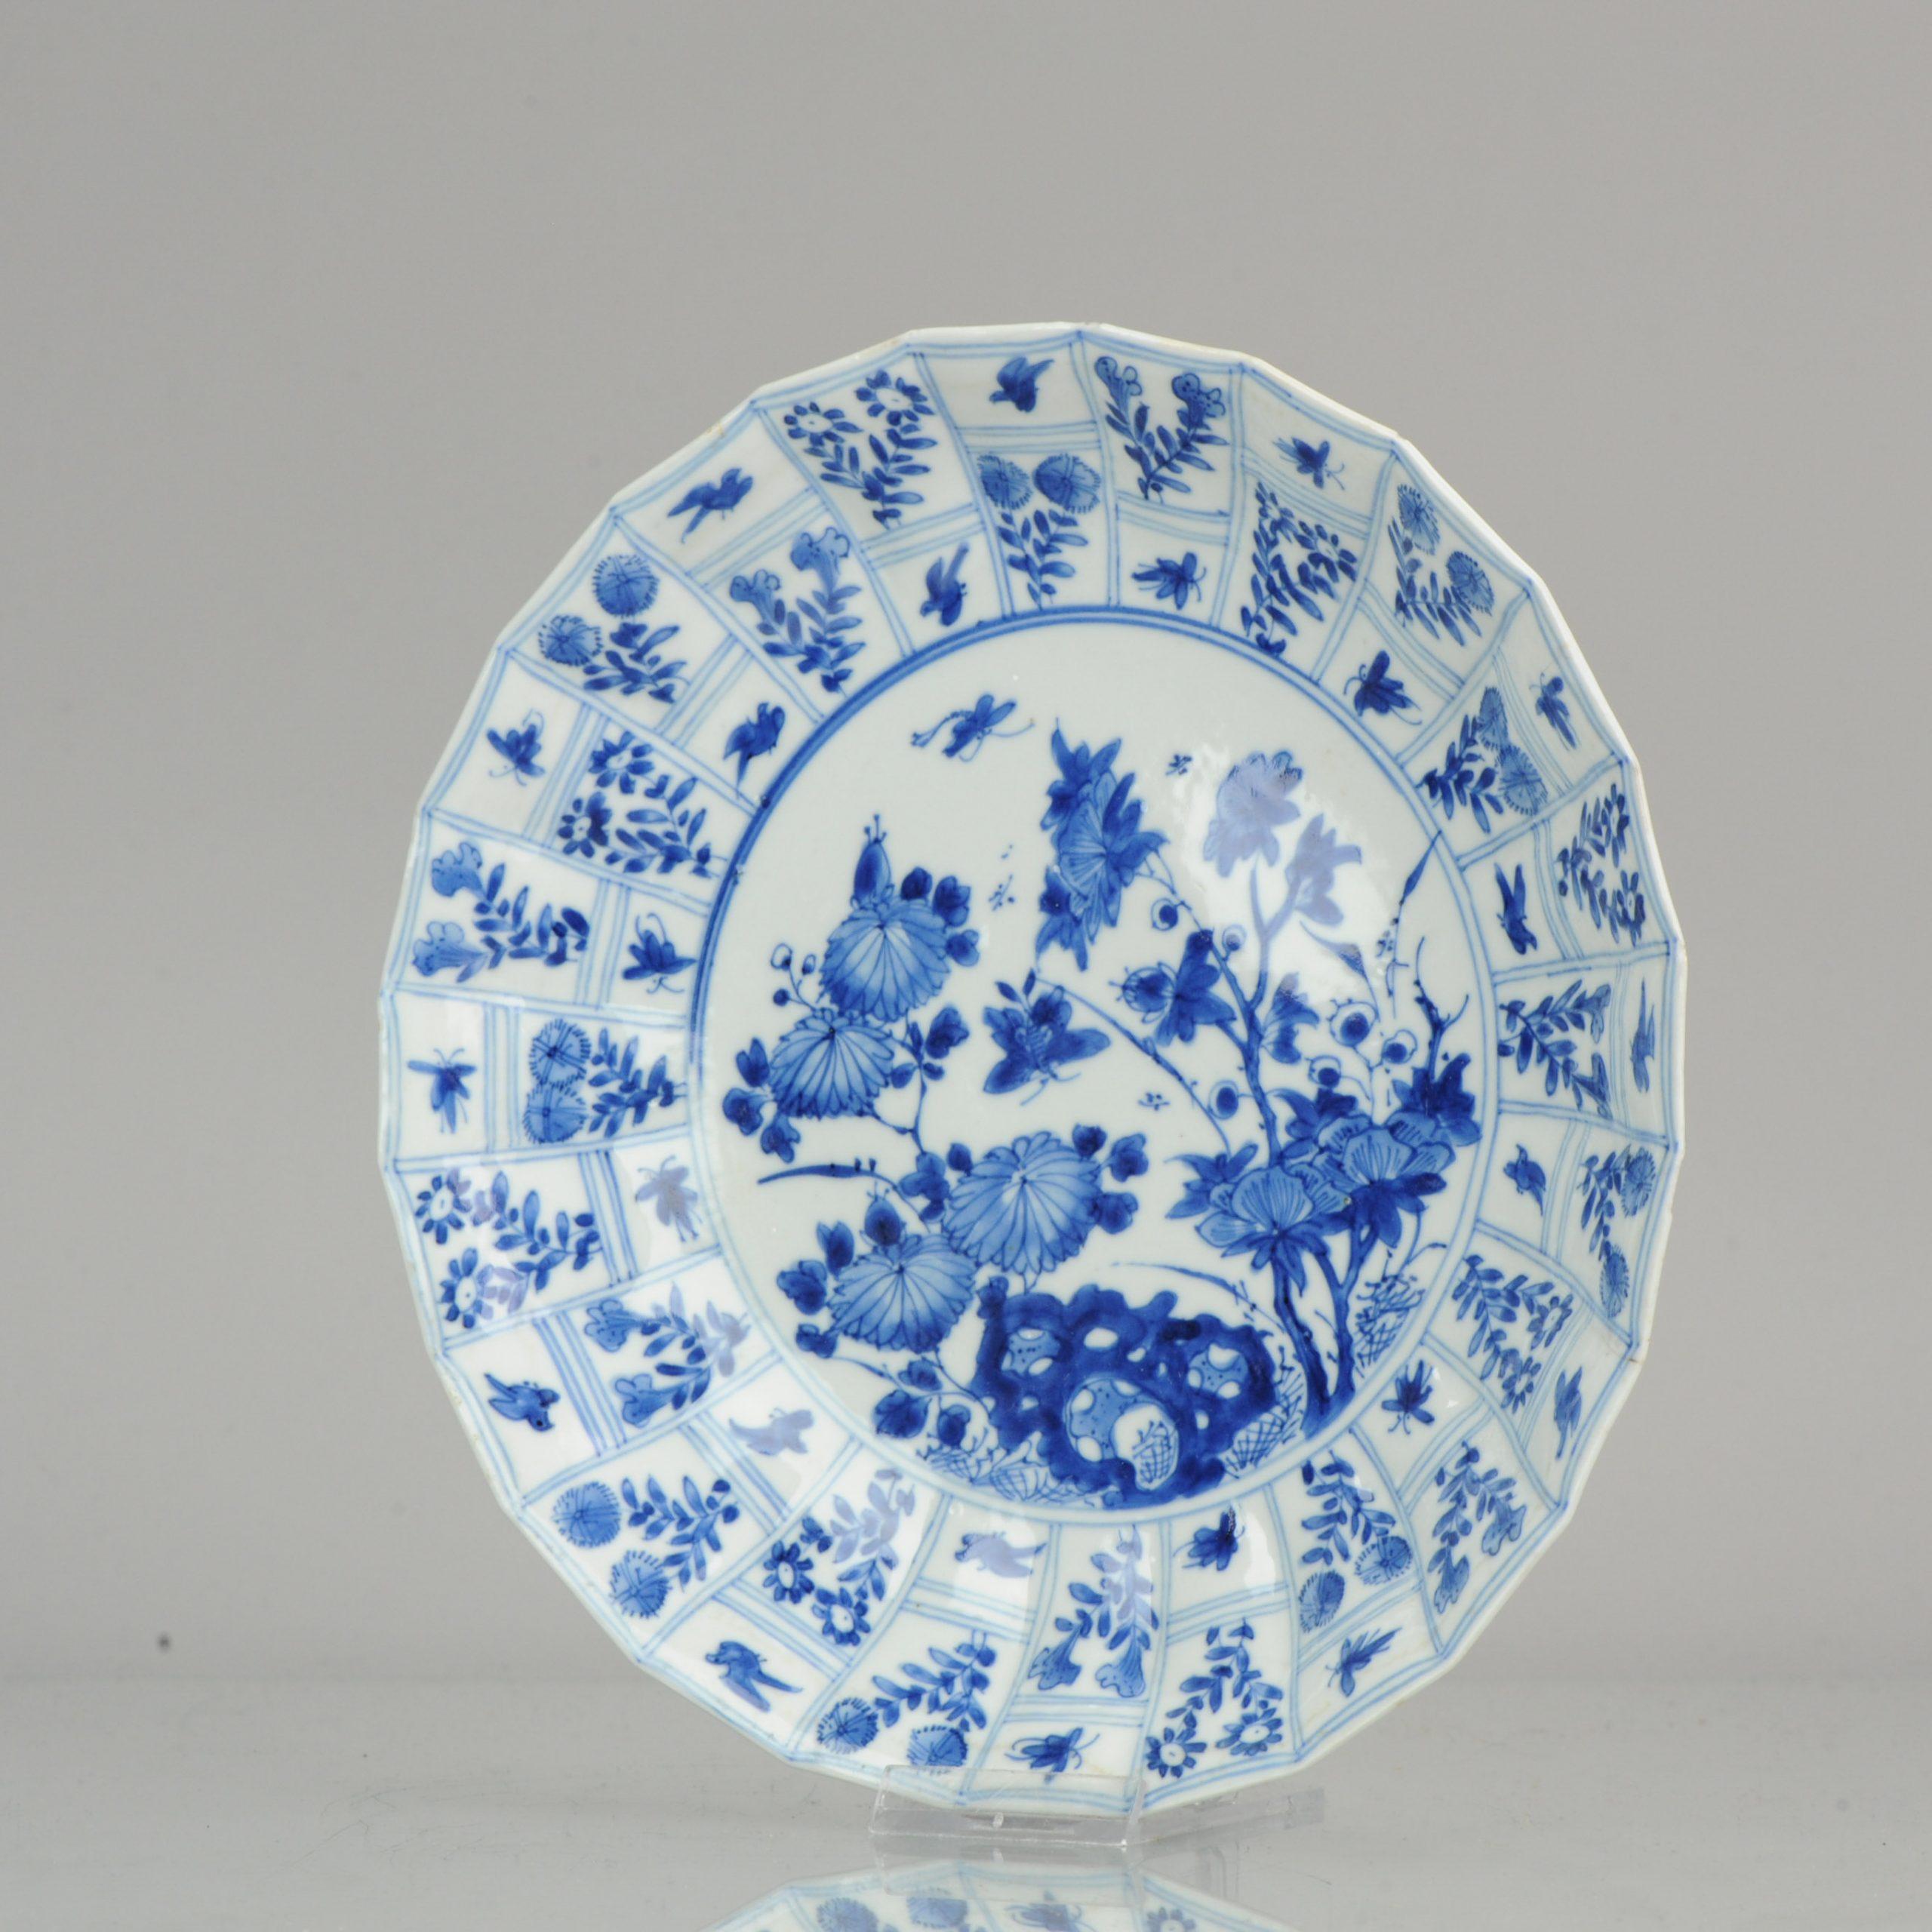 Blue and white porcelain deep plate, decorated with flowers, butterflies and birds. Absolutely top quality plate and rare design and shape. Marked at base with a YU mark. China, Kangxi. Blue and white porcelain deep plate, decorated with figures and